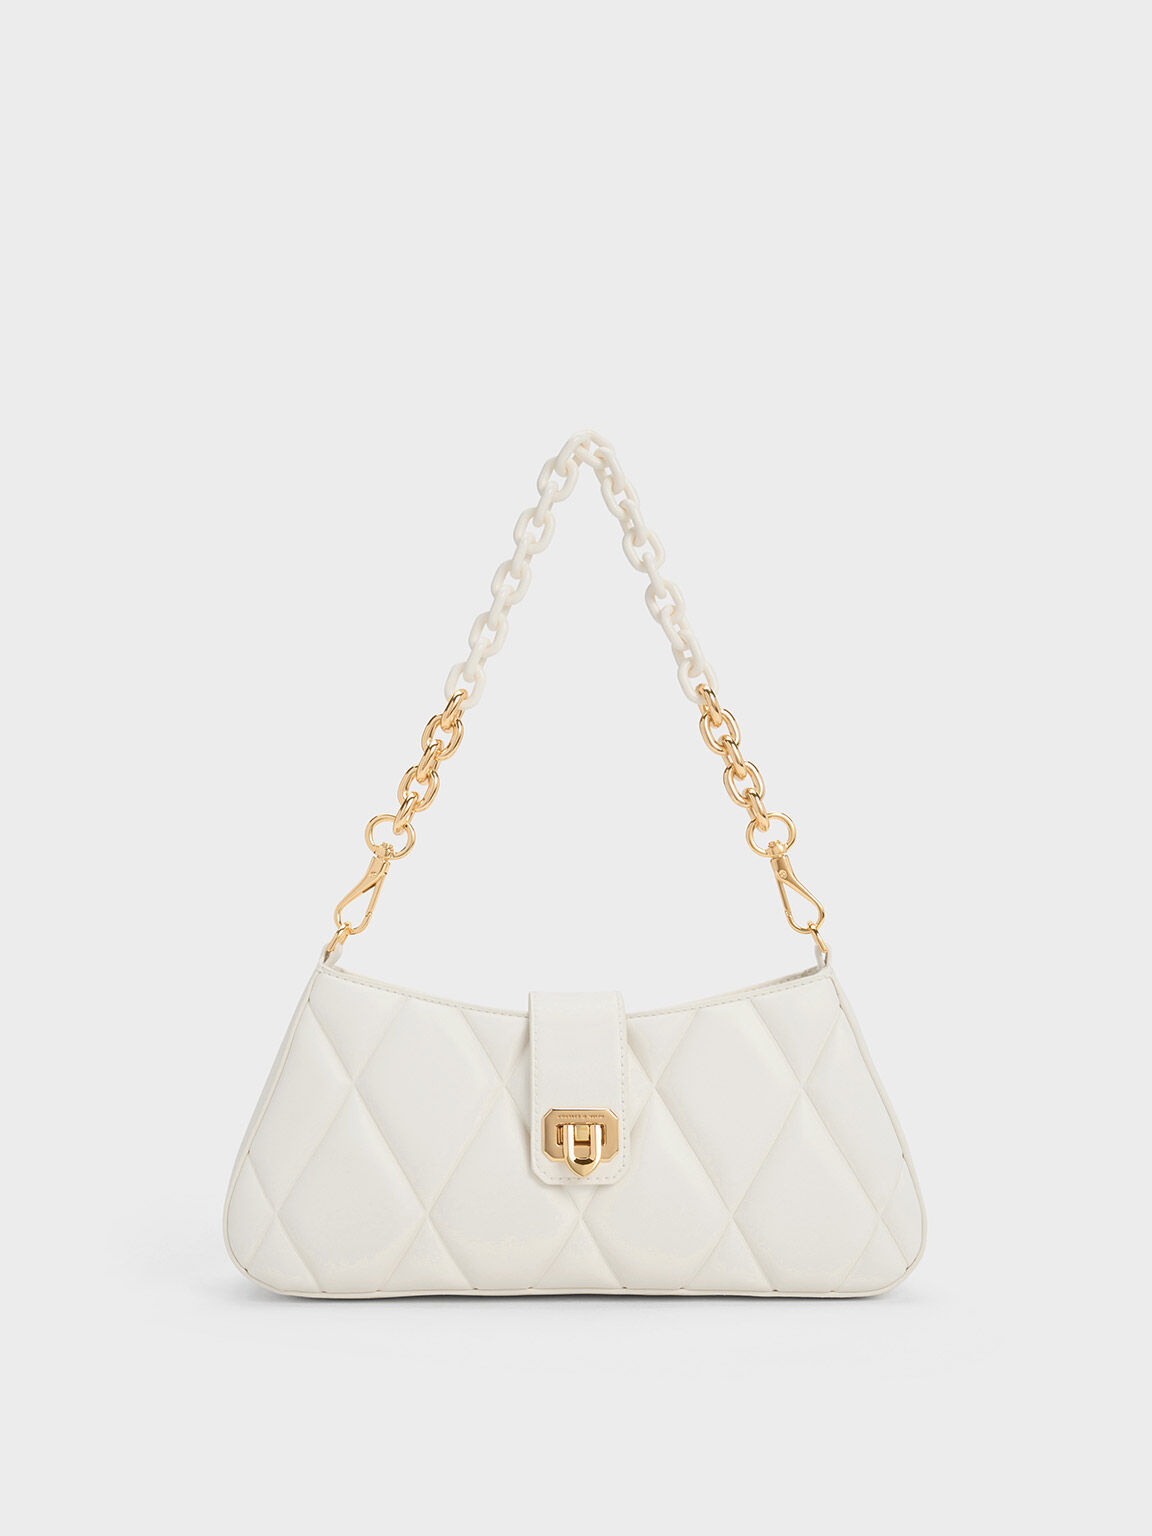 Bags, White Purse With Gold Chain